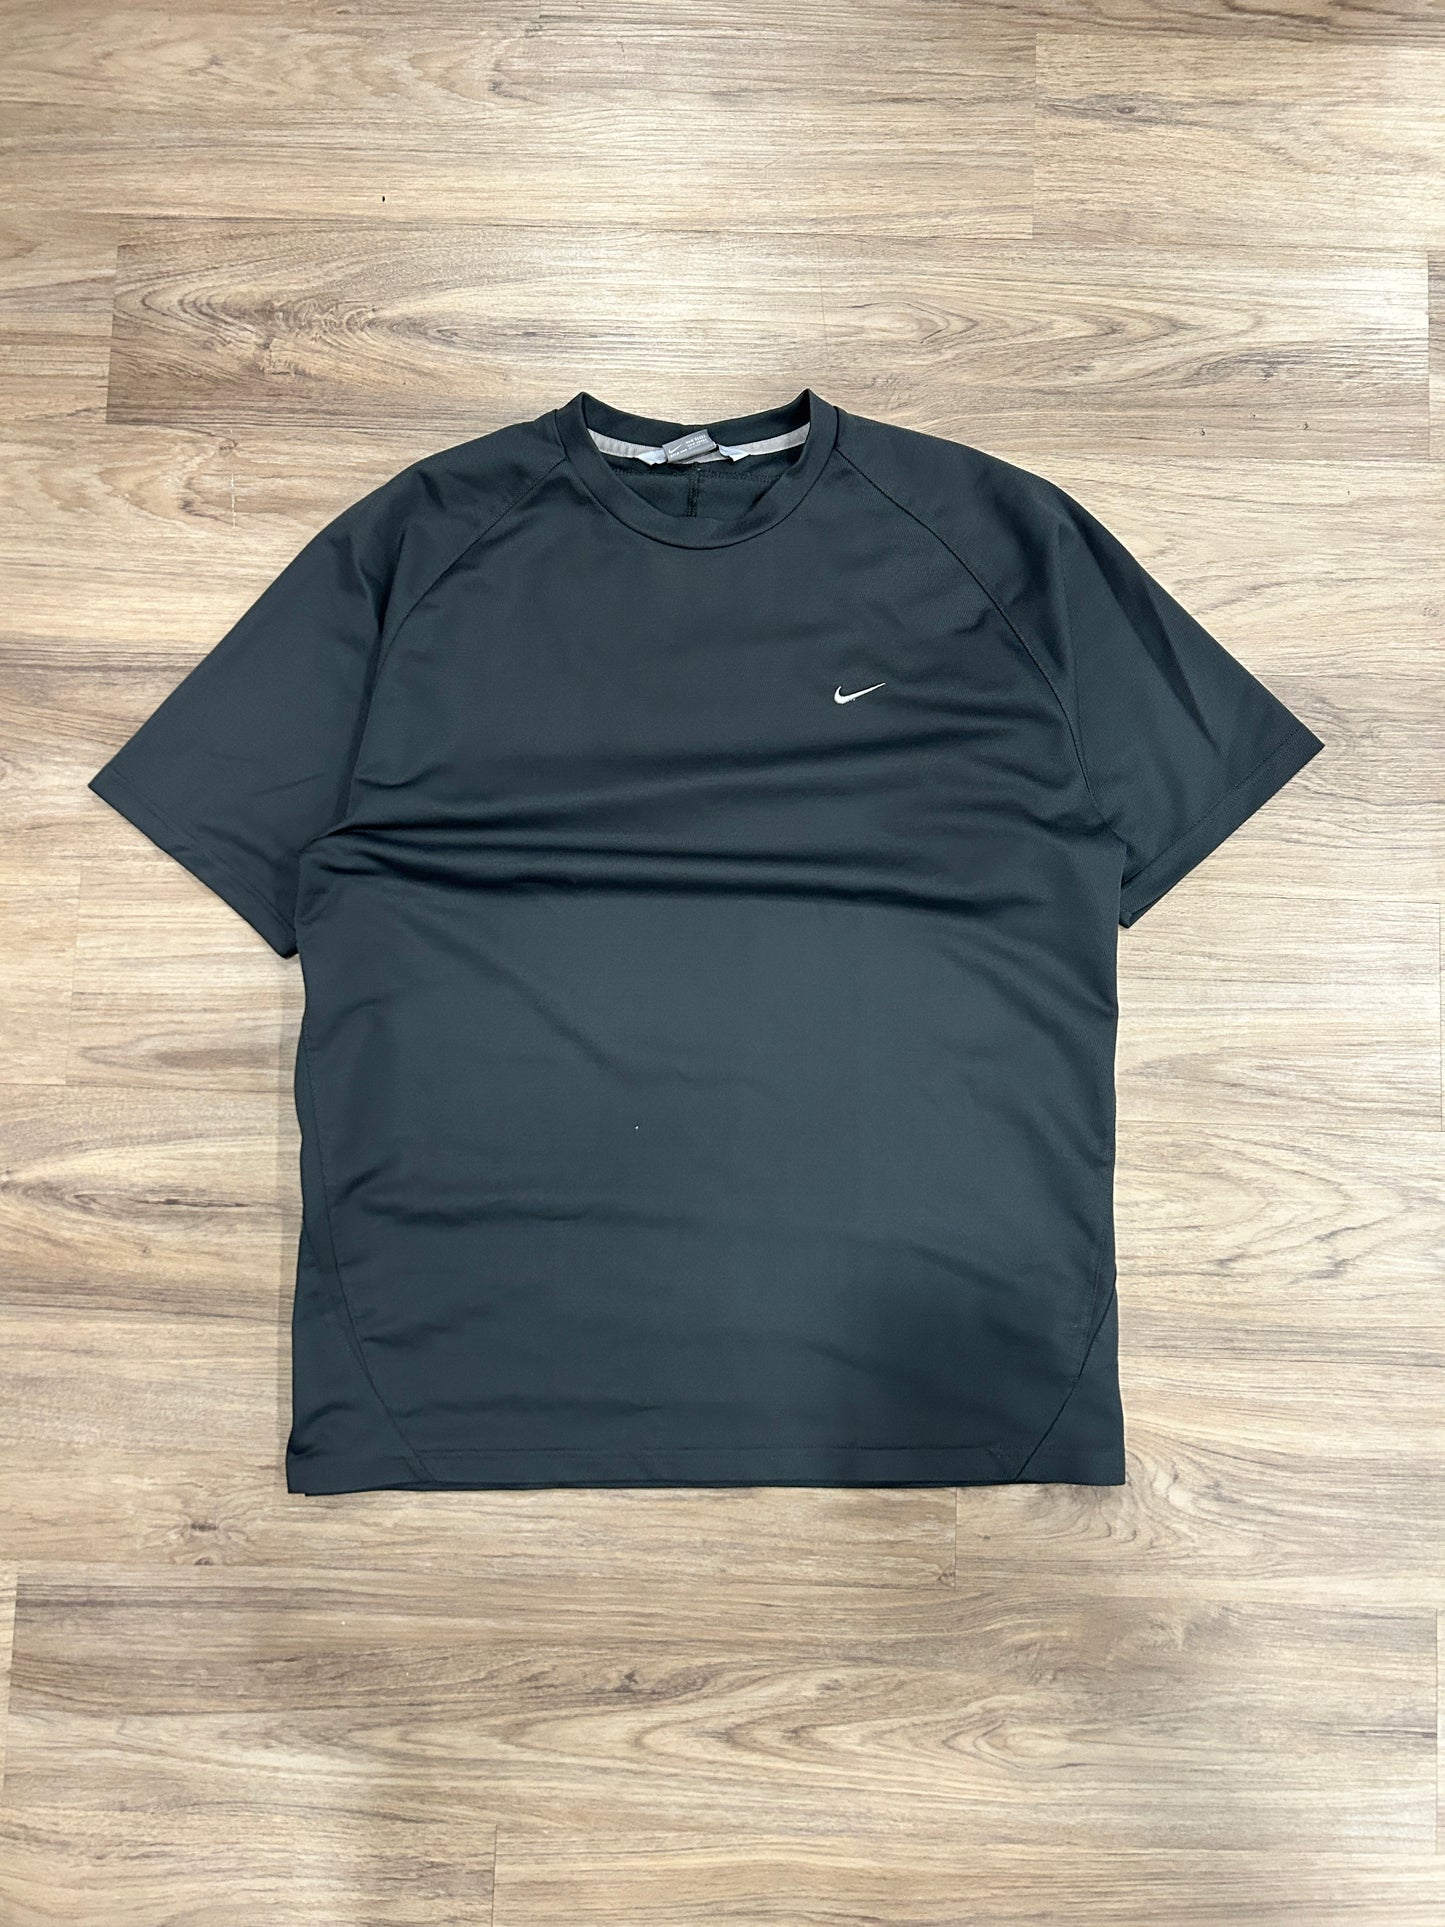 Vintage Forest Green Nike Mesh Tee (L)